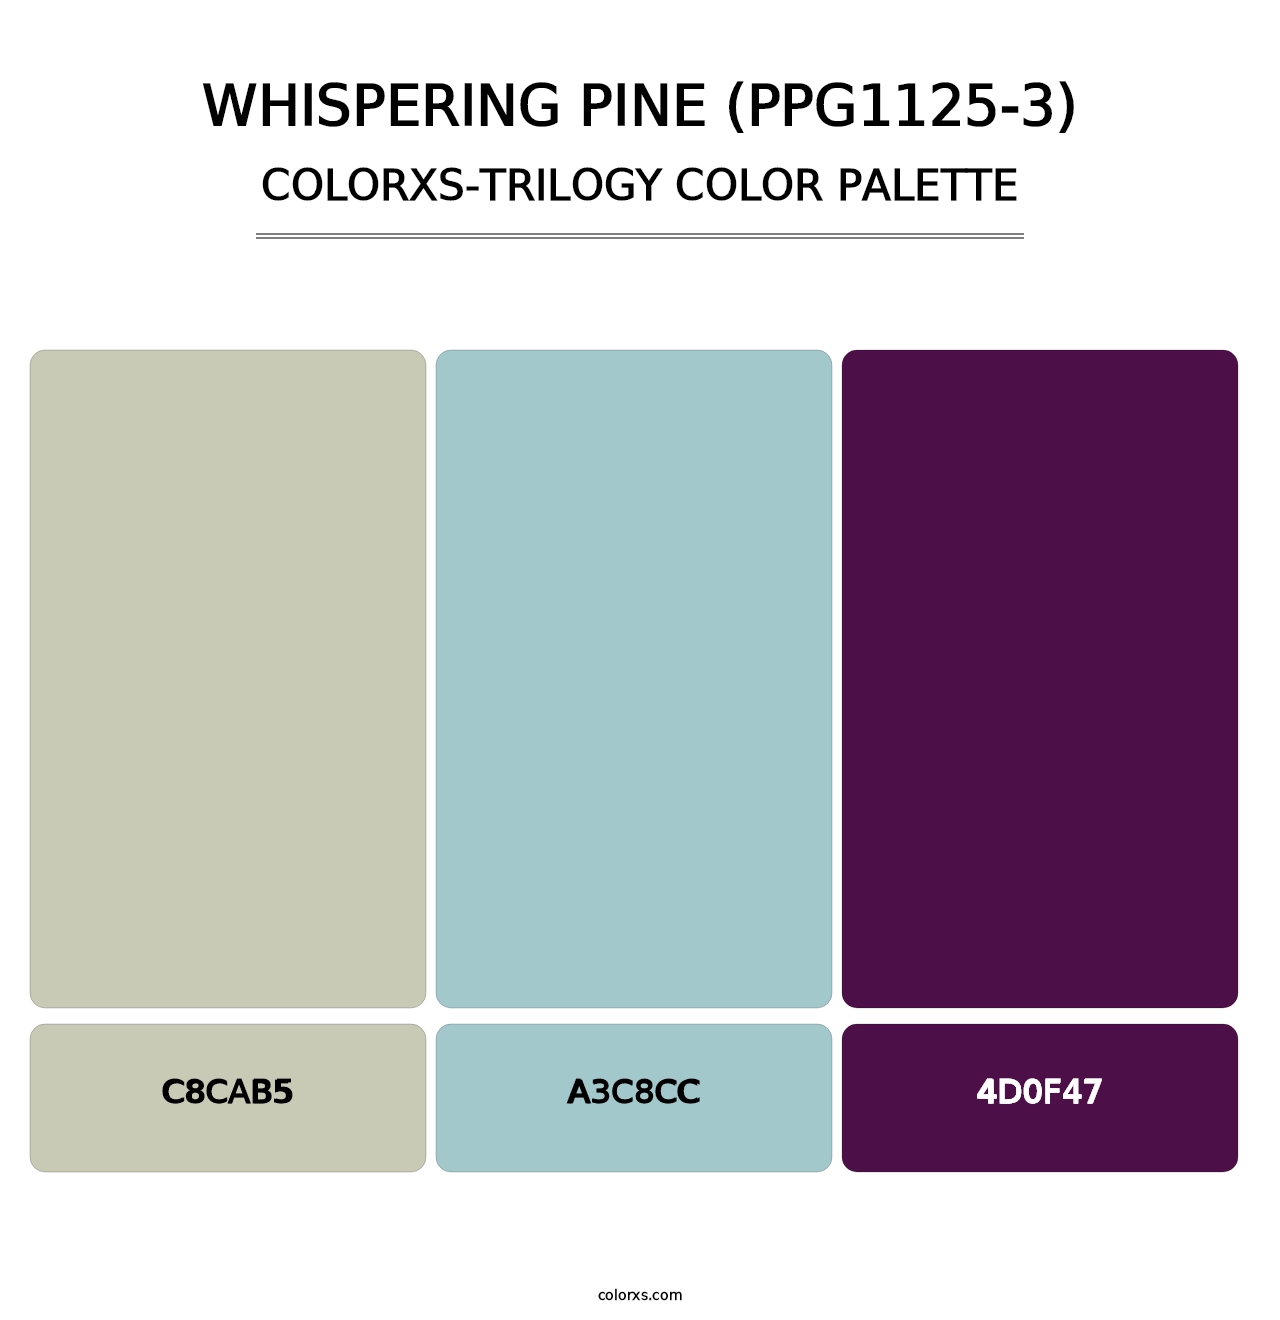 Whispering Pine (PPG1125-3) - Colorxs Trilogy Palette